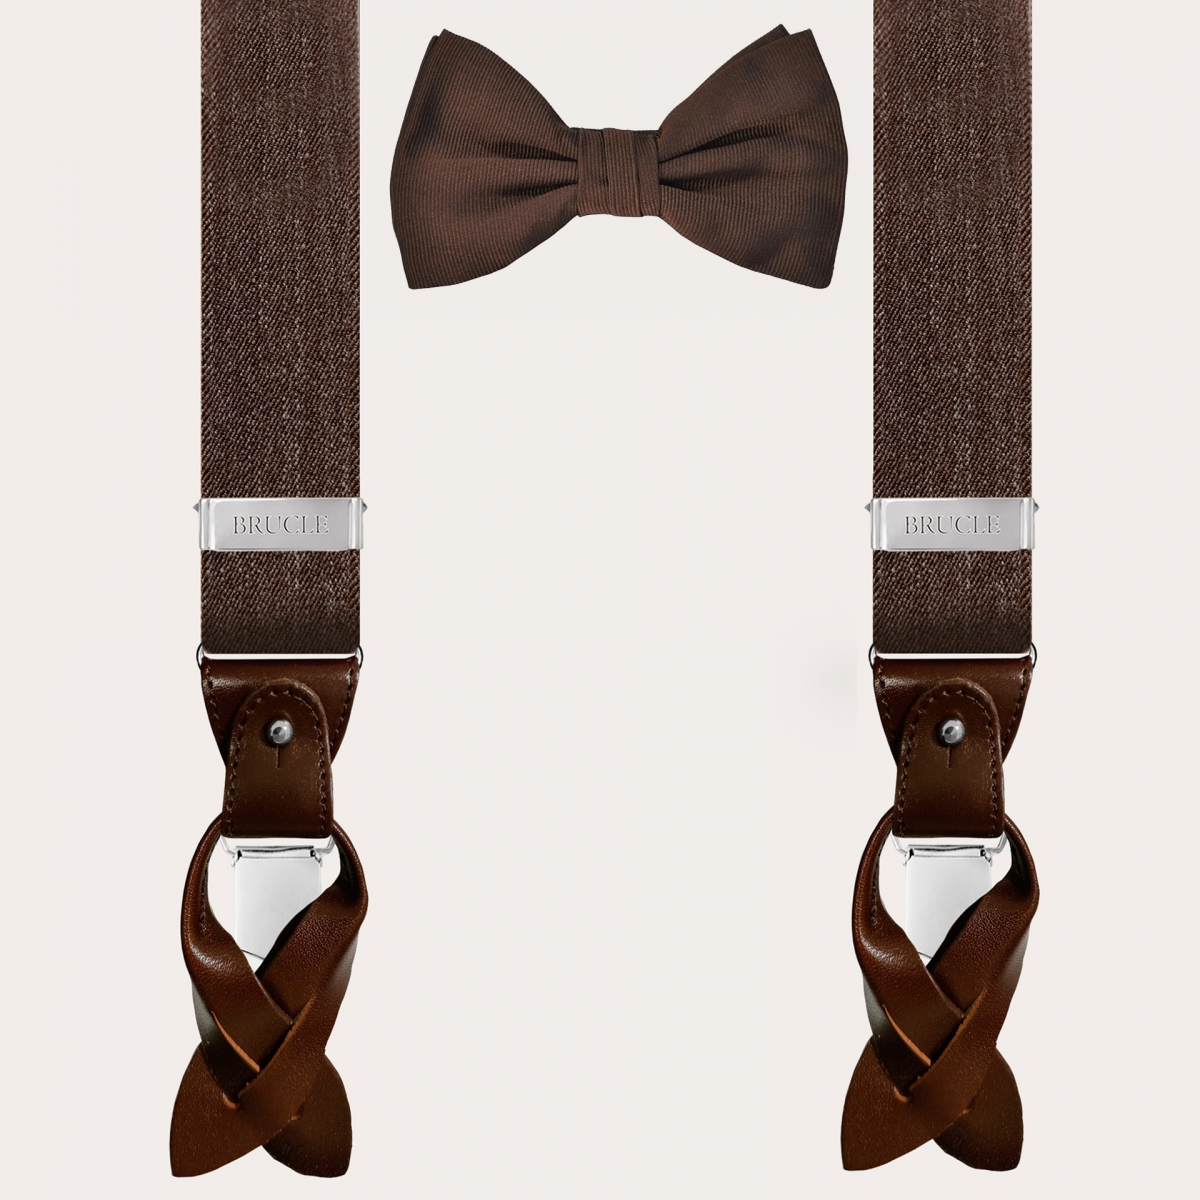 BRUCLE Coordinated set of jeans suspenders and brown jacquard bow tie